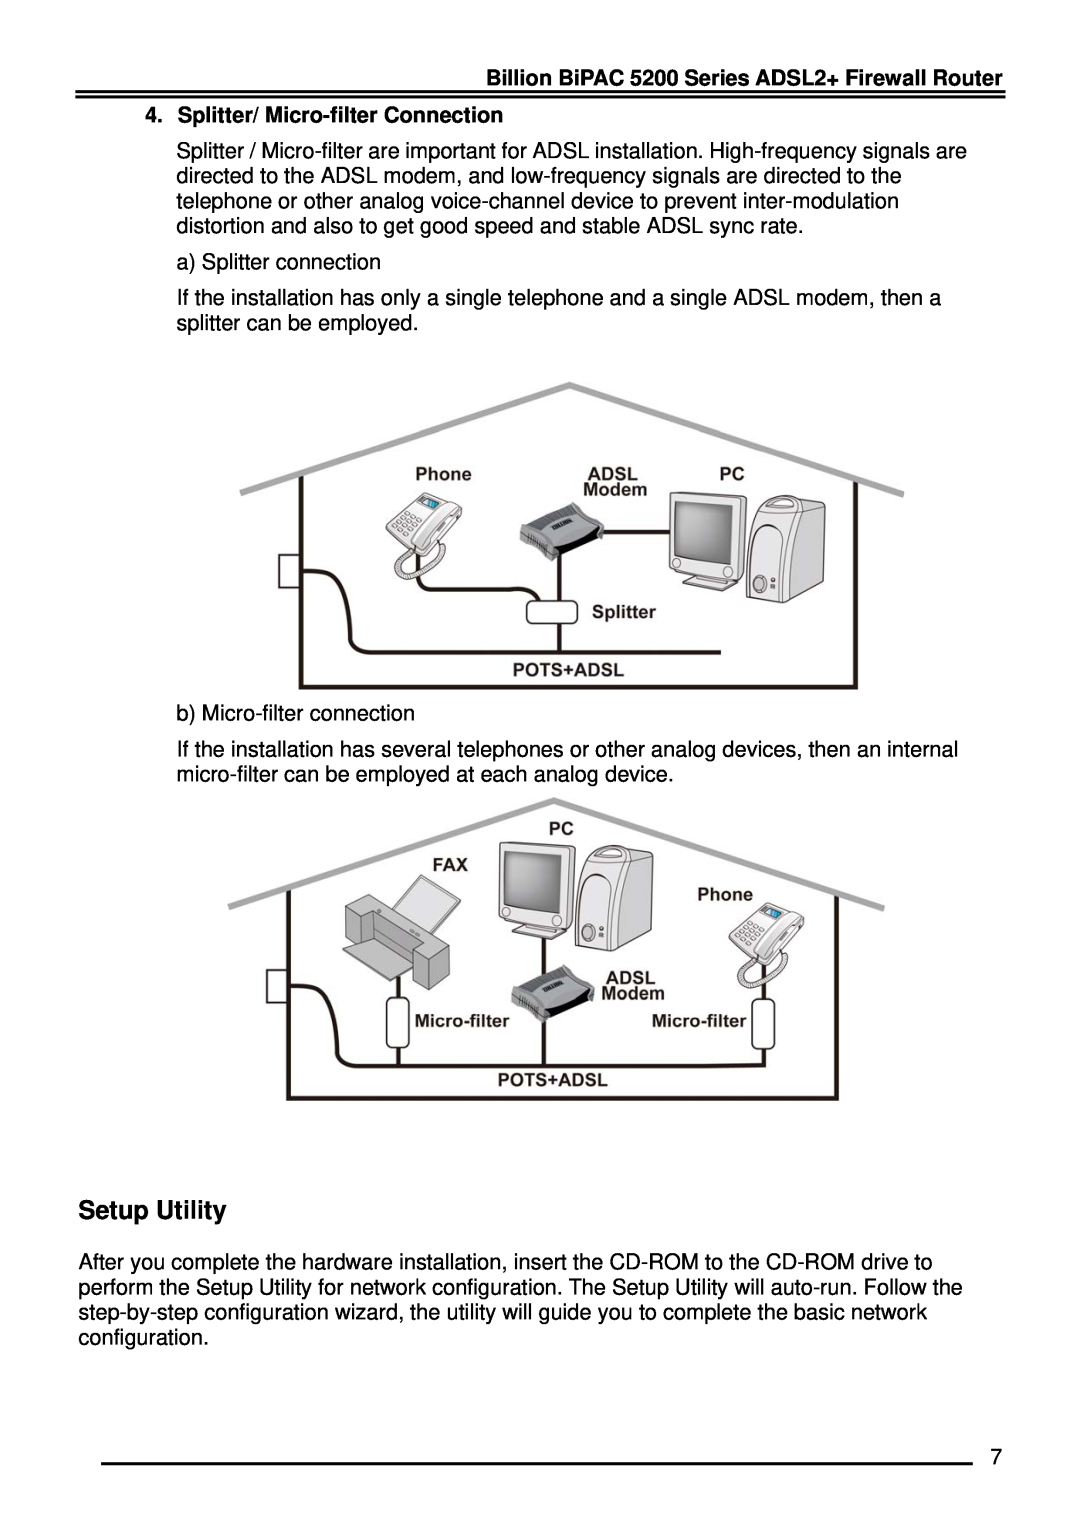 Billion Electric Company 5200S Series quick start Setup Utility, Splitter/ Micro-filter Connection 